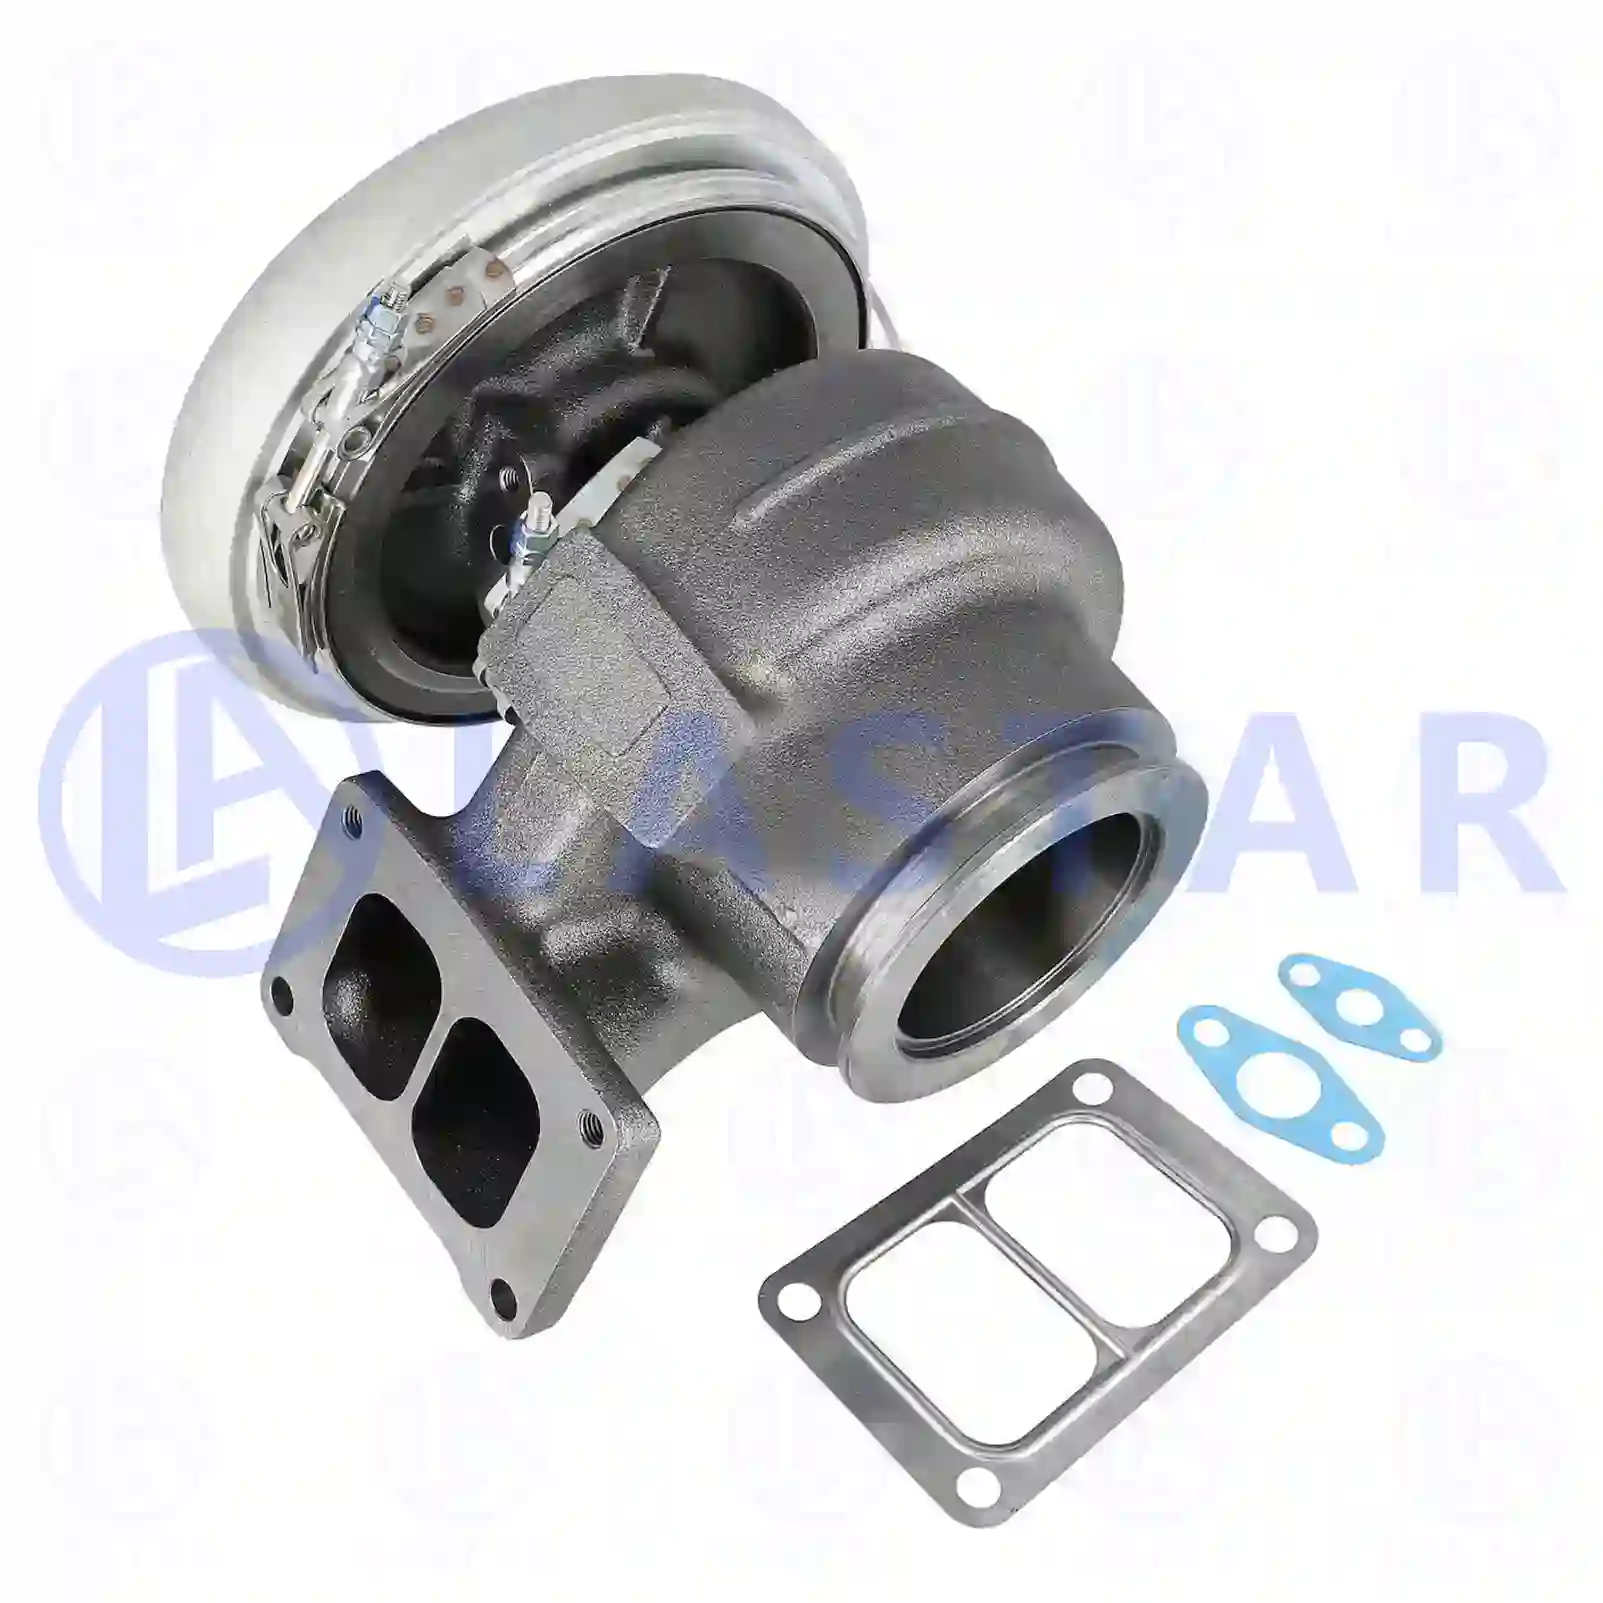 Turbocharger, with gasket kit, 77700480, 20712174, 20857656, 208576560, 85000593, 85000645 ||  77700480 Lastar Spare Part | Truck Spare Parts, Auotomotive Spare Parts Turbocharger, with gasket kit, 77700480, 20712174, 20857656, 208576560, 85000593, 85000645 ||  77700480 Lastar Spare Part | Truck Spare Parts, Auotomotive Spare Parts